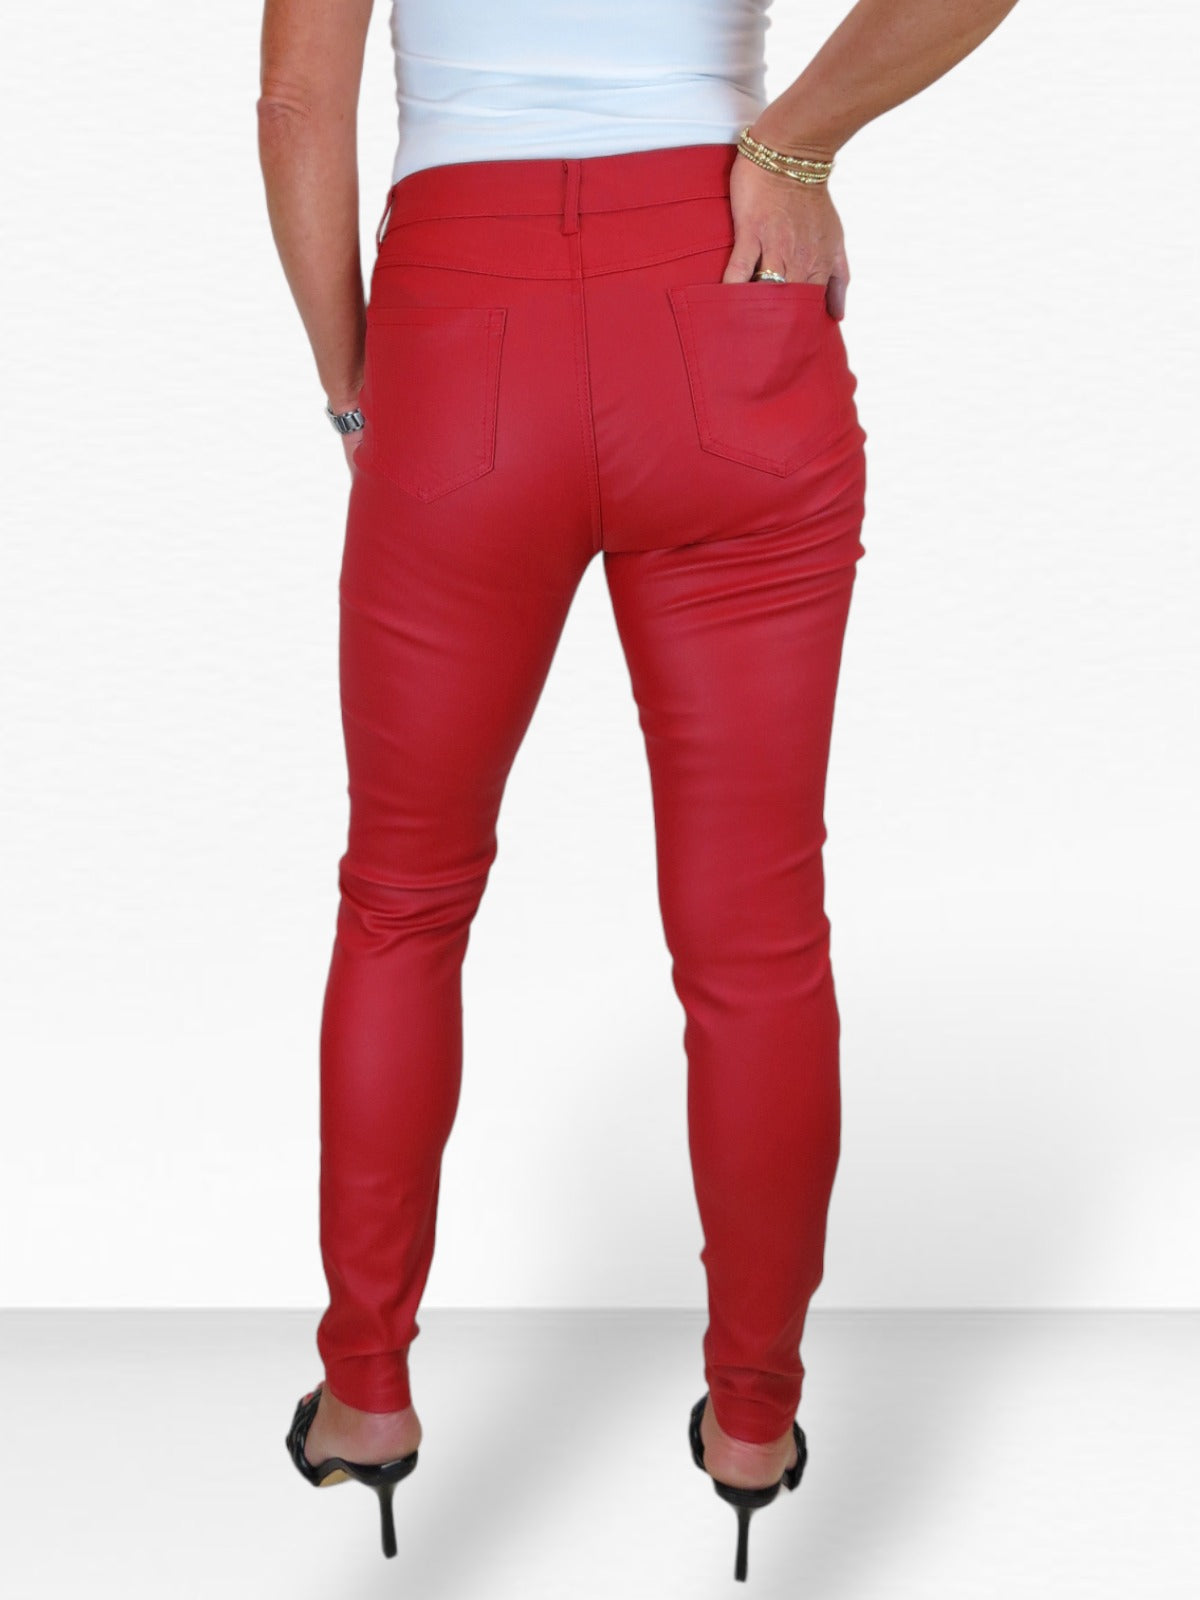 Womens High Waist Stretch Leather Look Jeans Red